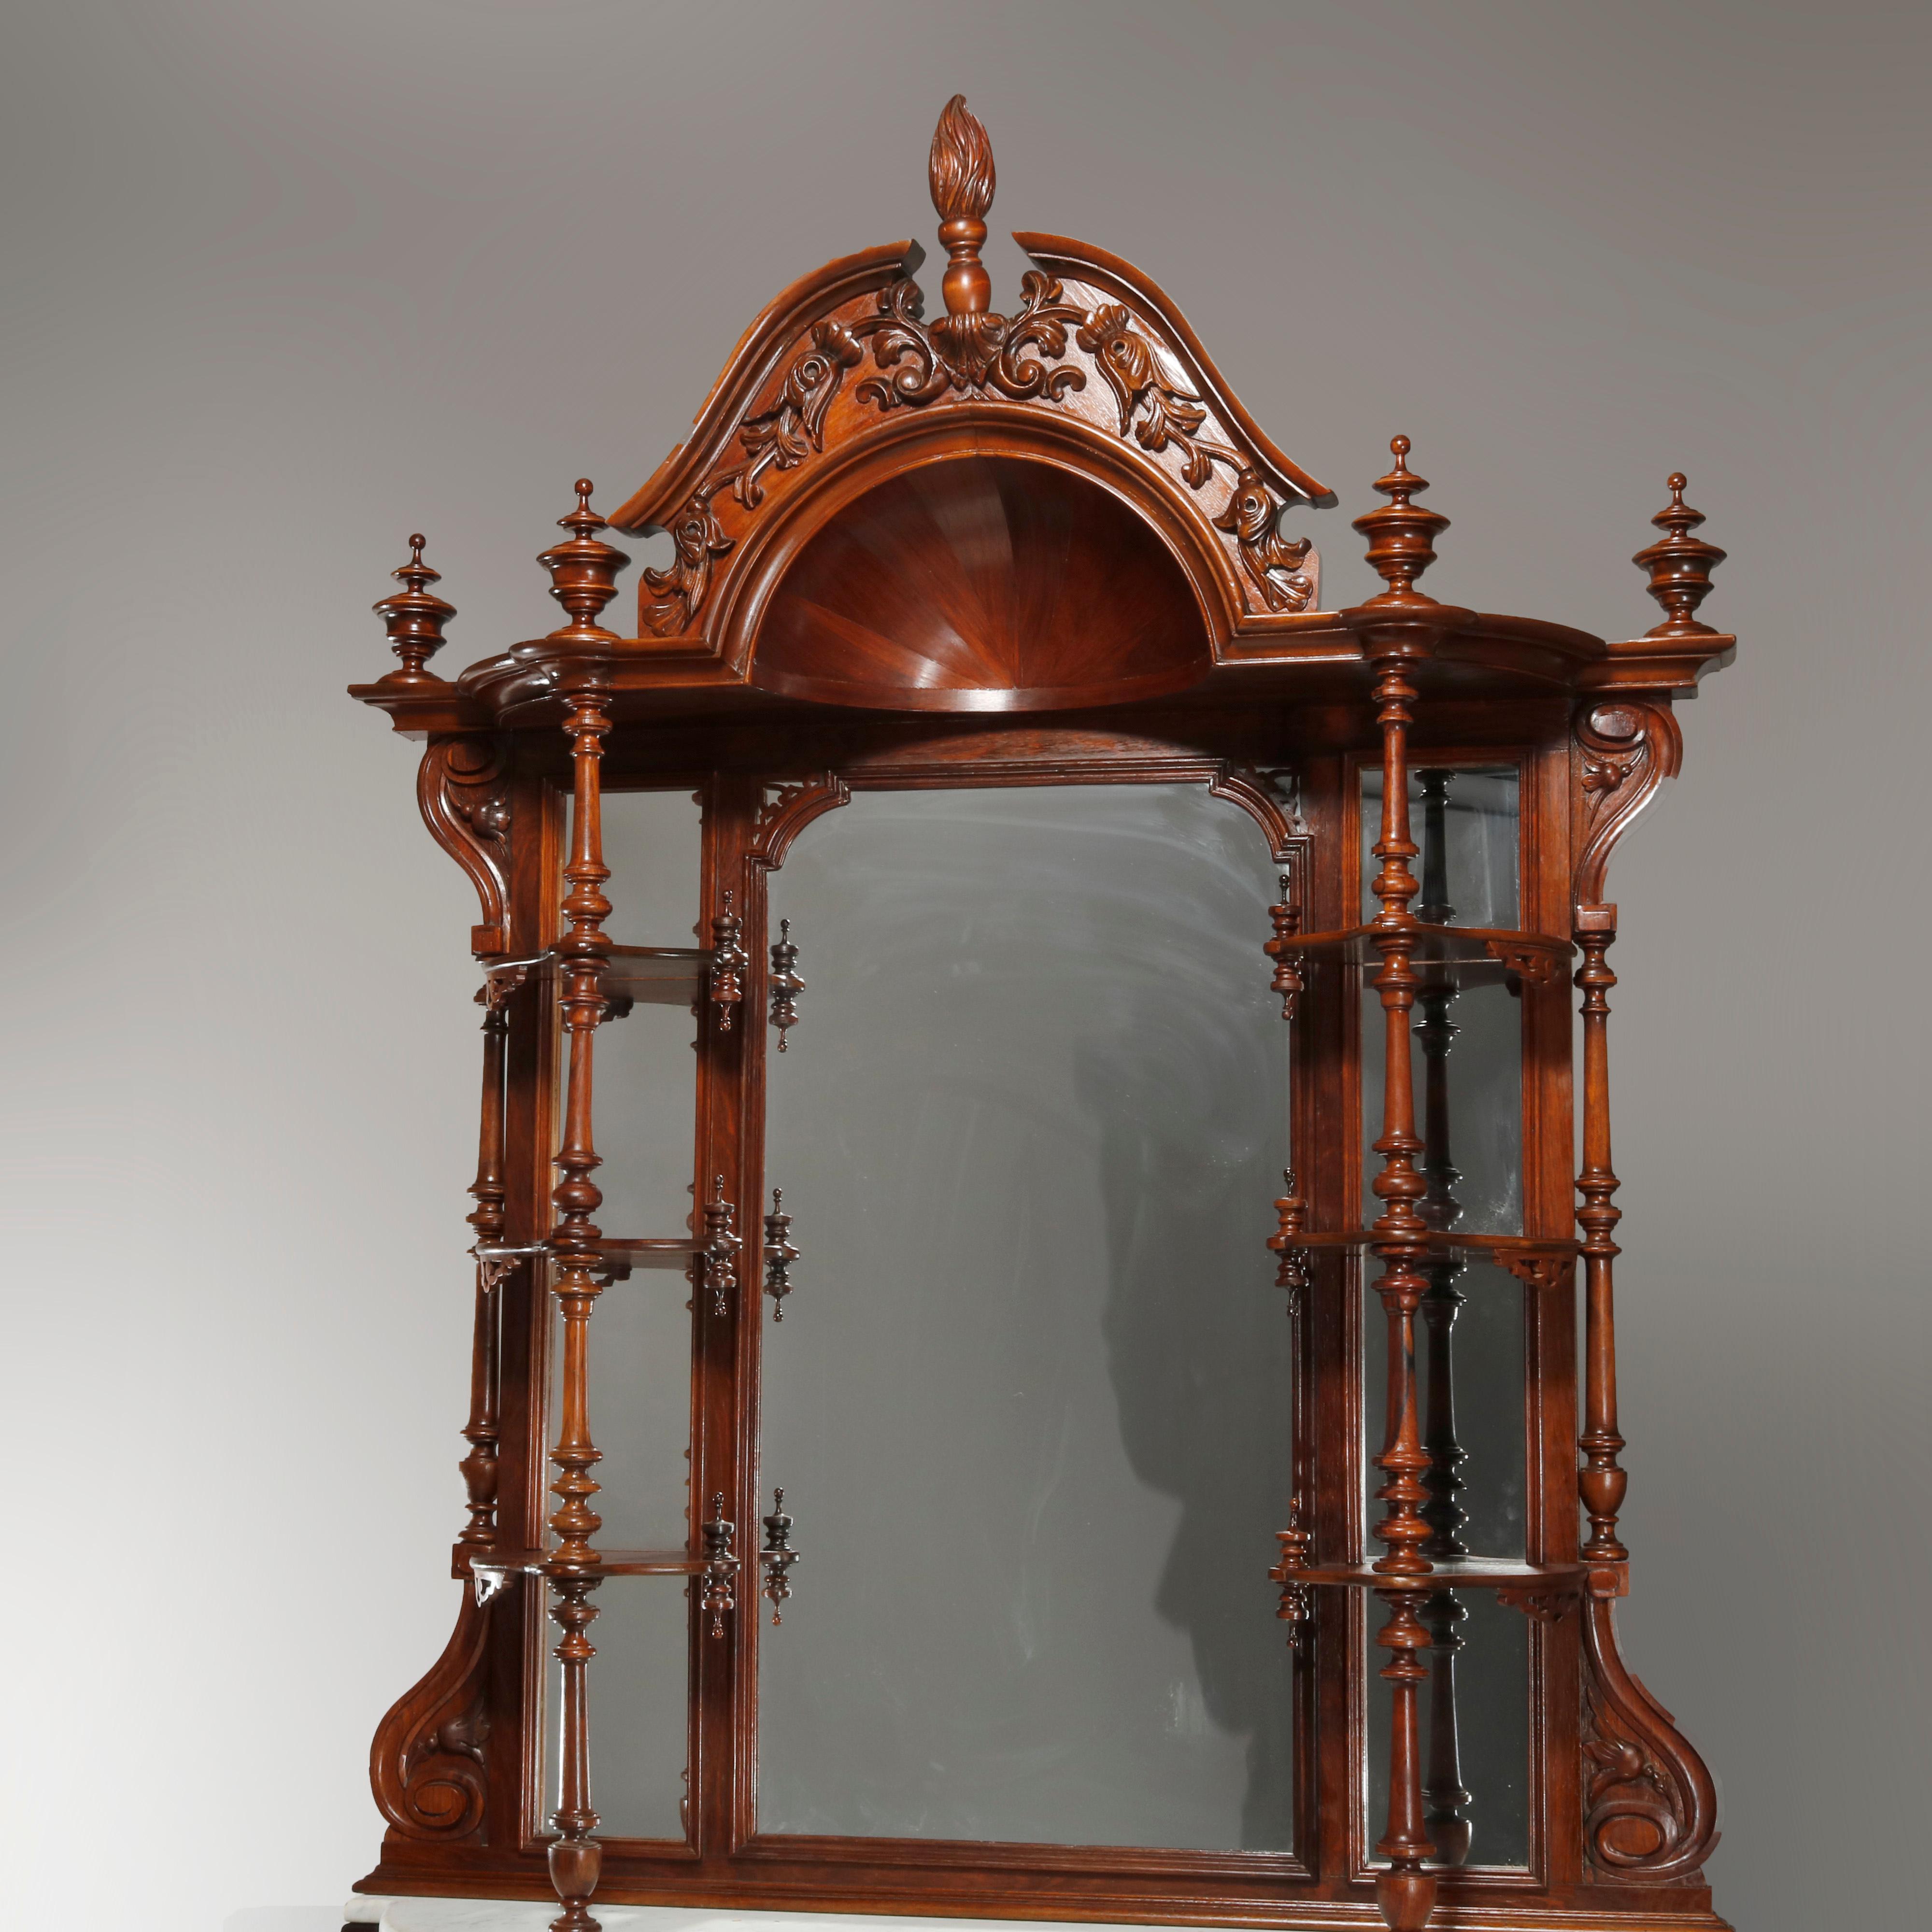 An antique Rococo Revival étagère sideboard offers rosewood construction with broken arch crest having carved foliate elements, central finial and sunburst dome over surmounting mirror with flaking display shelves surmounting case with shaped marble